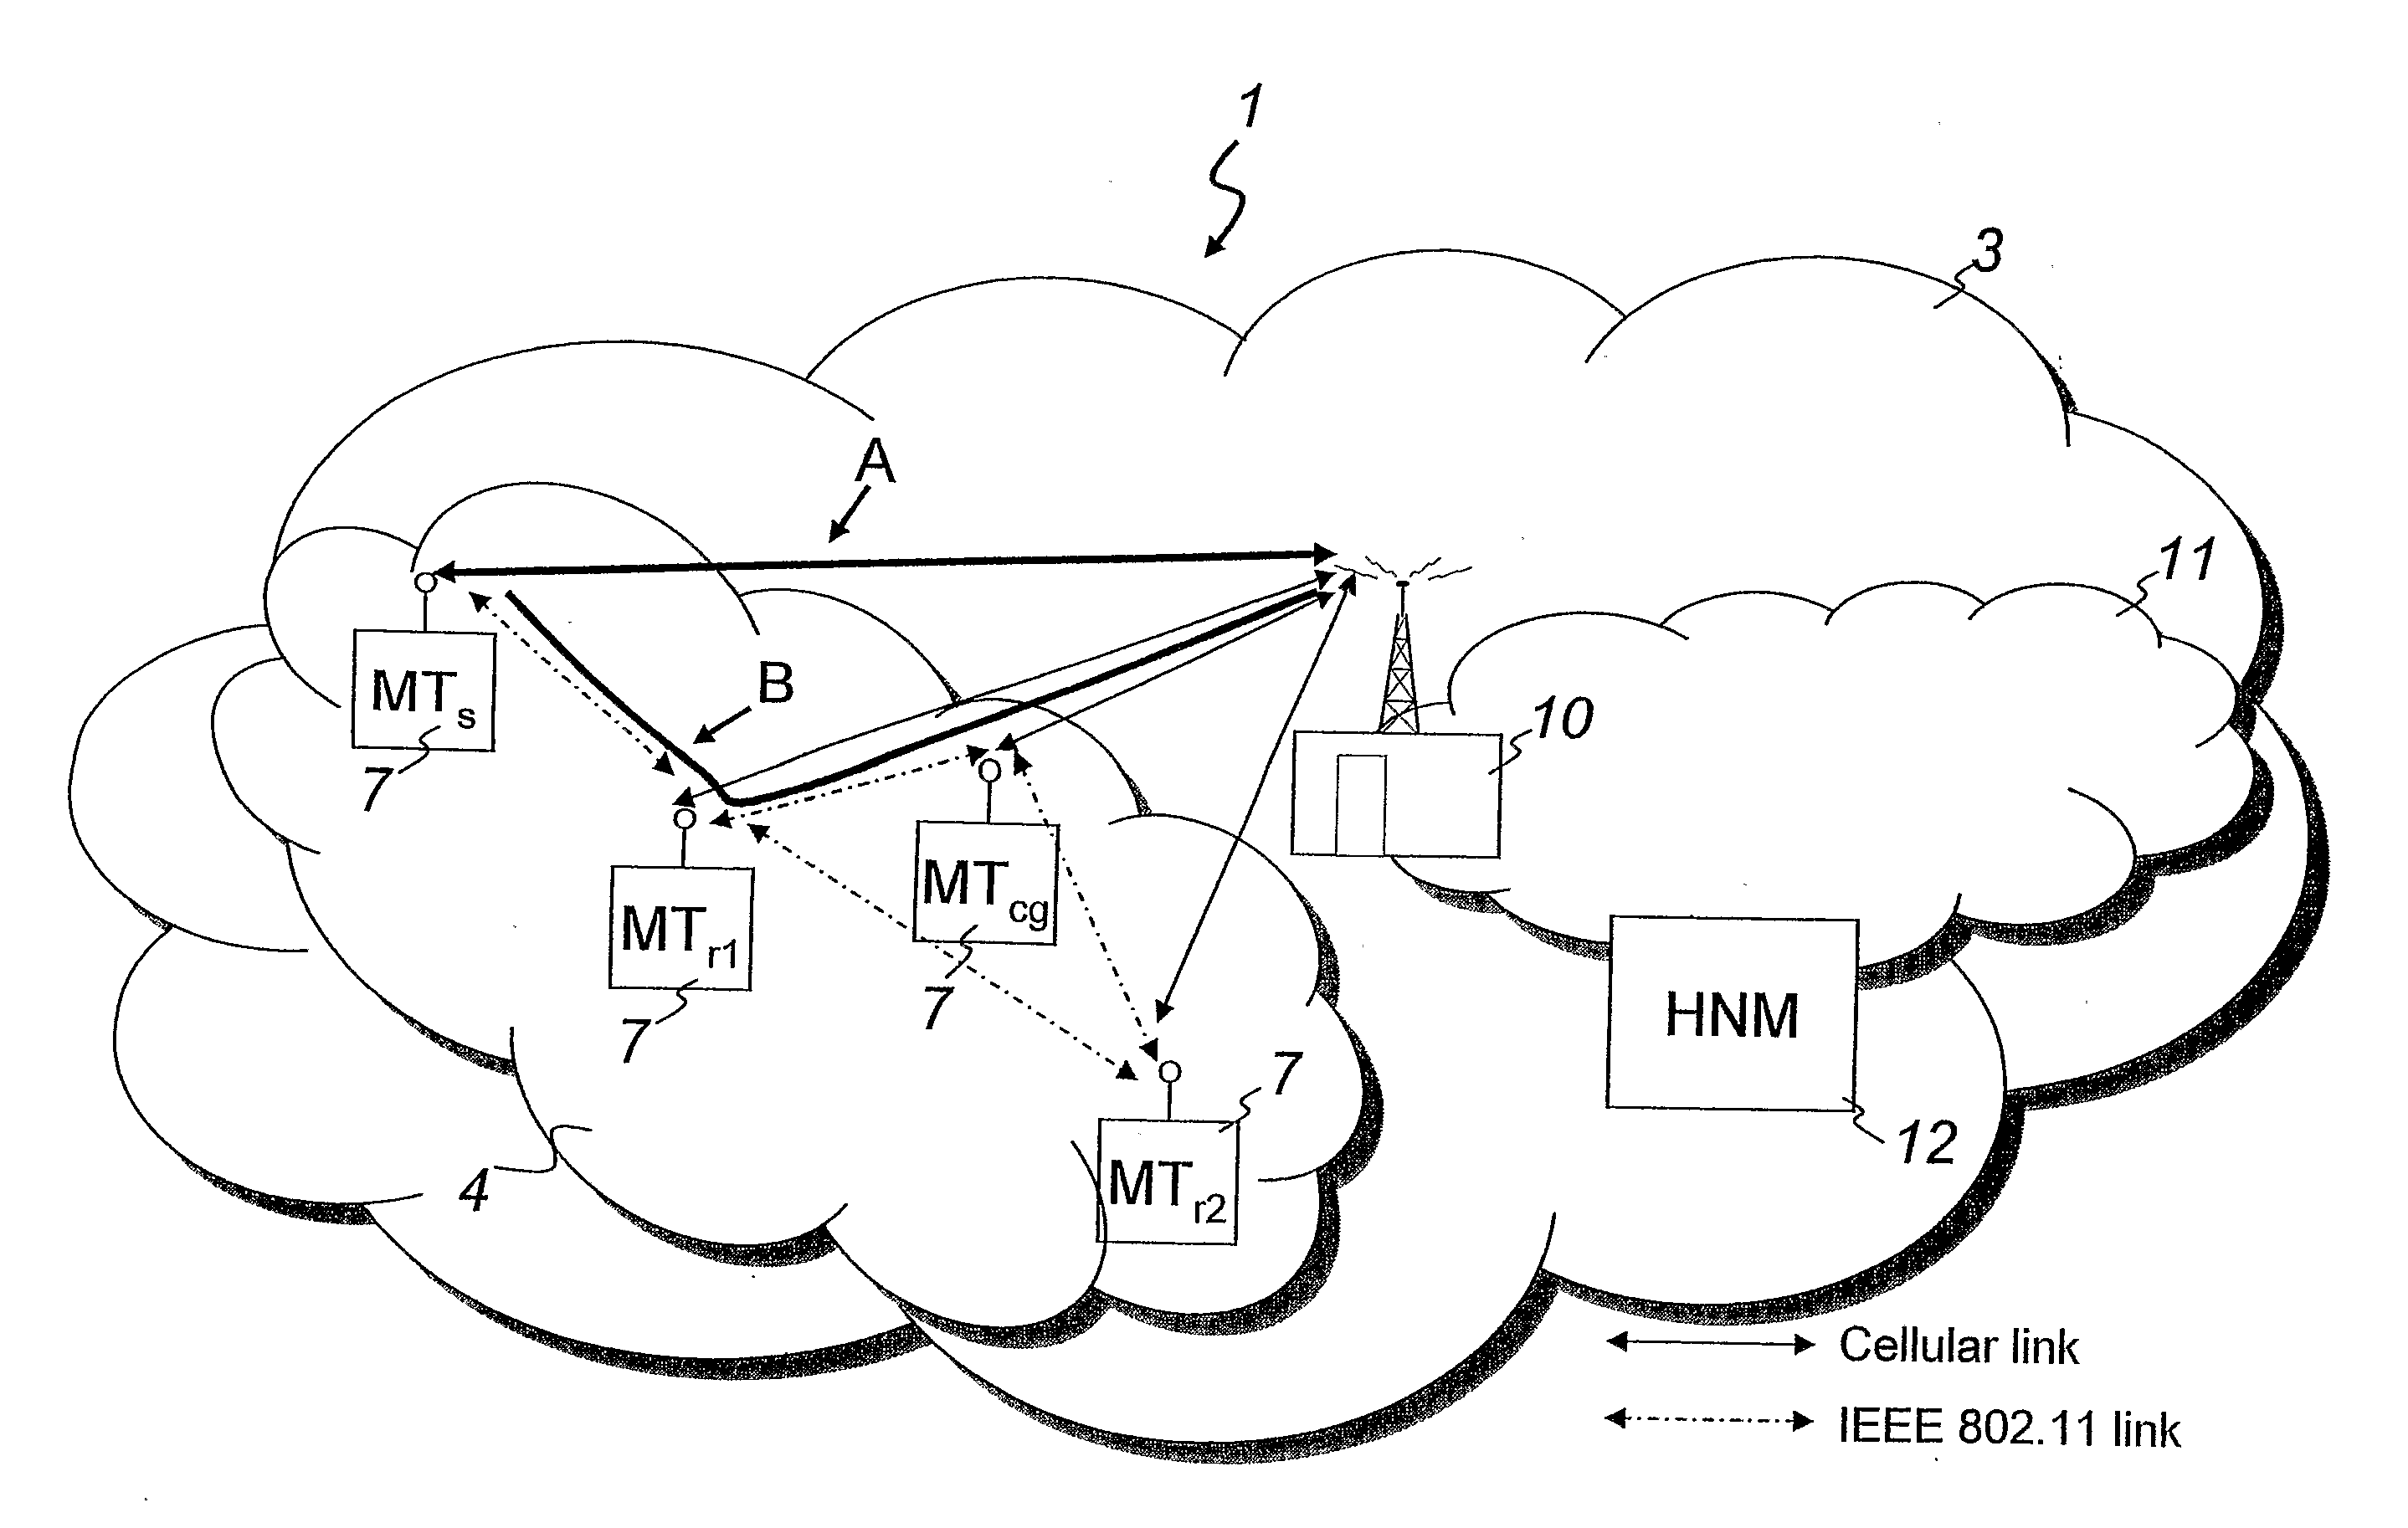 Management of a Hybrid Communication Network Comprising a Cellular Network and a Local Network